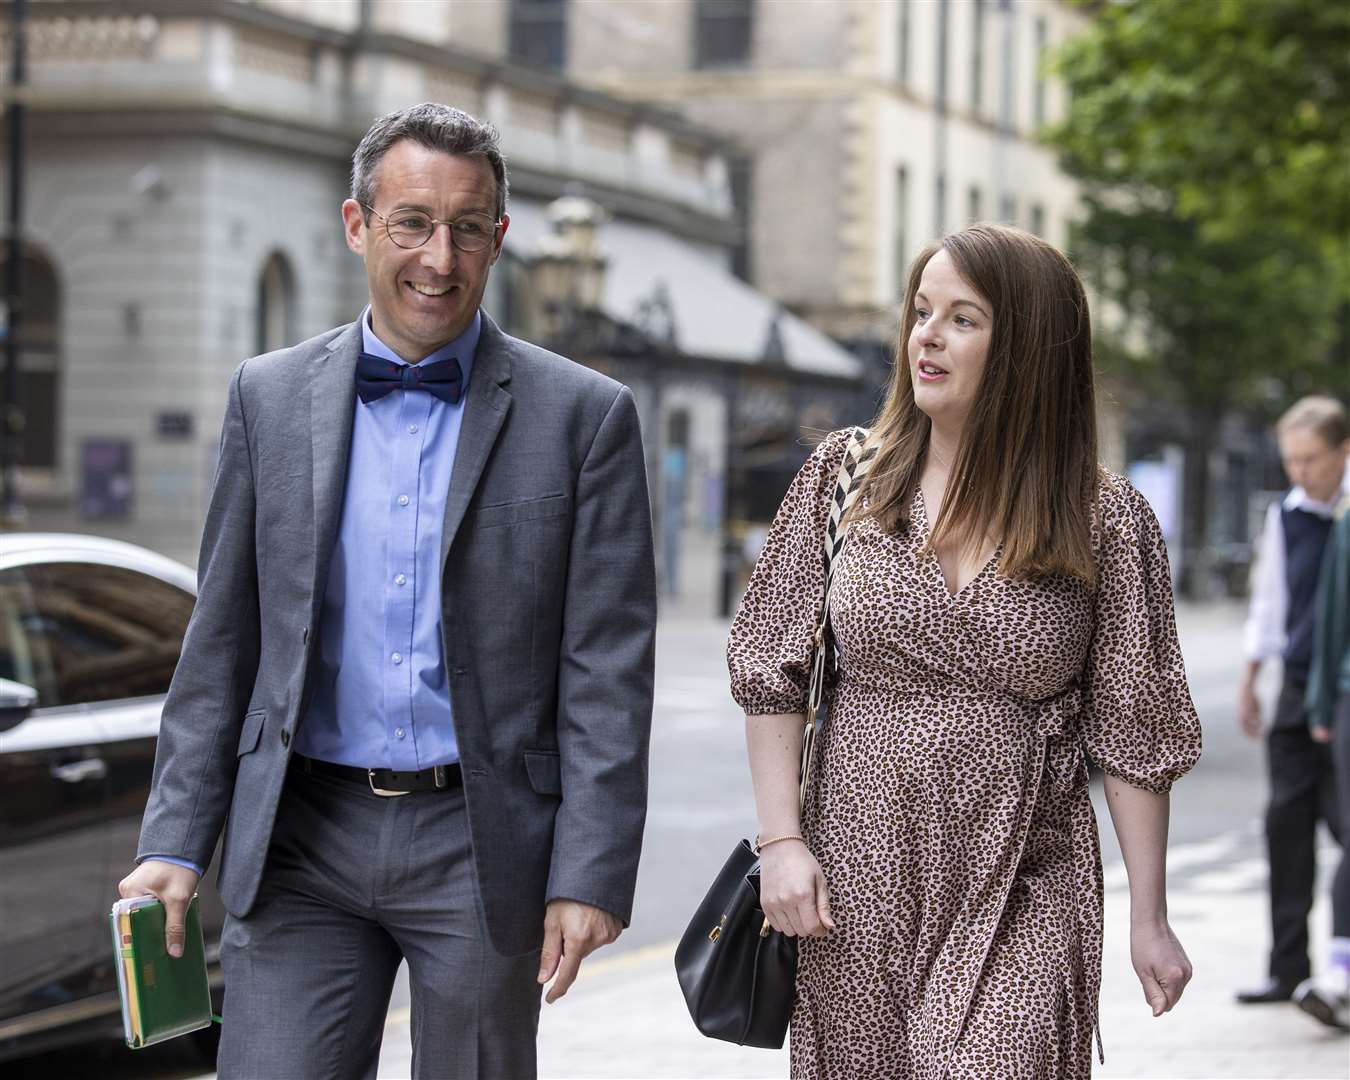 Andrew Muir and Nuala McAllister of the Alliance party arrive for a meeting with Tanaiste Micheal Martin (Liam McBurney/PA).